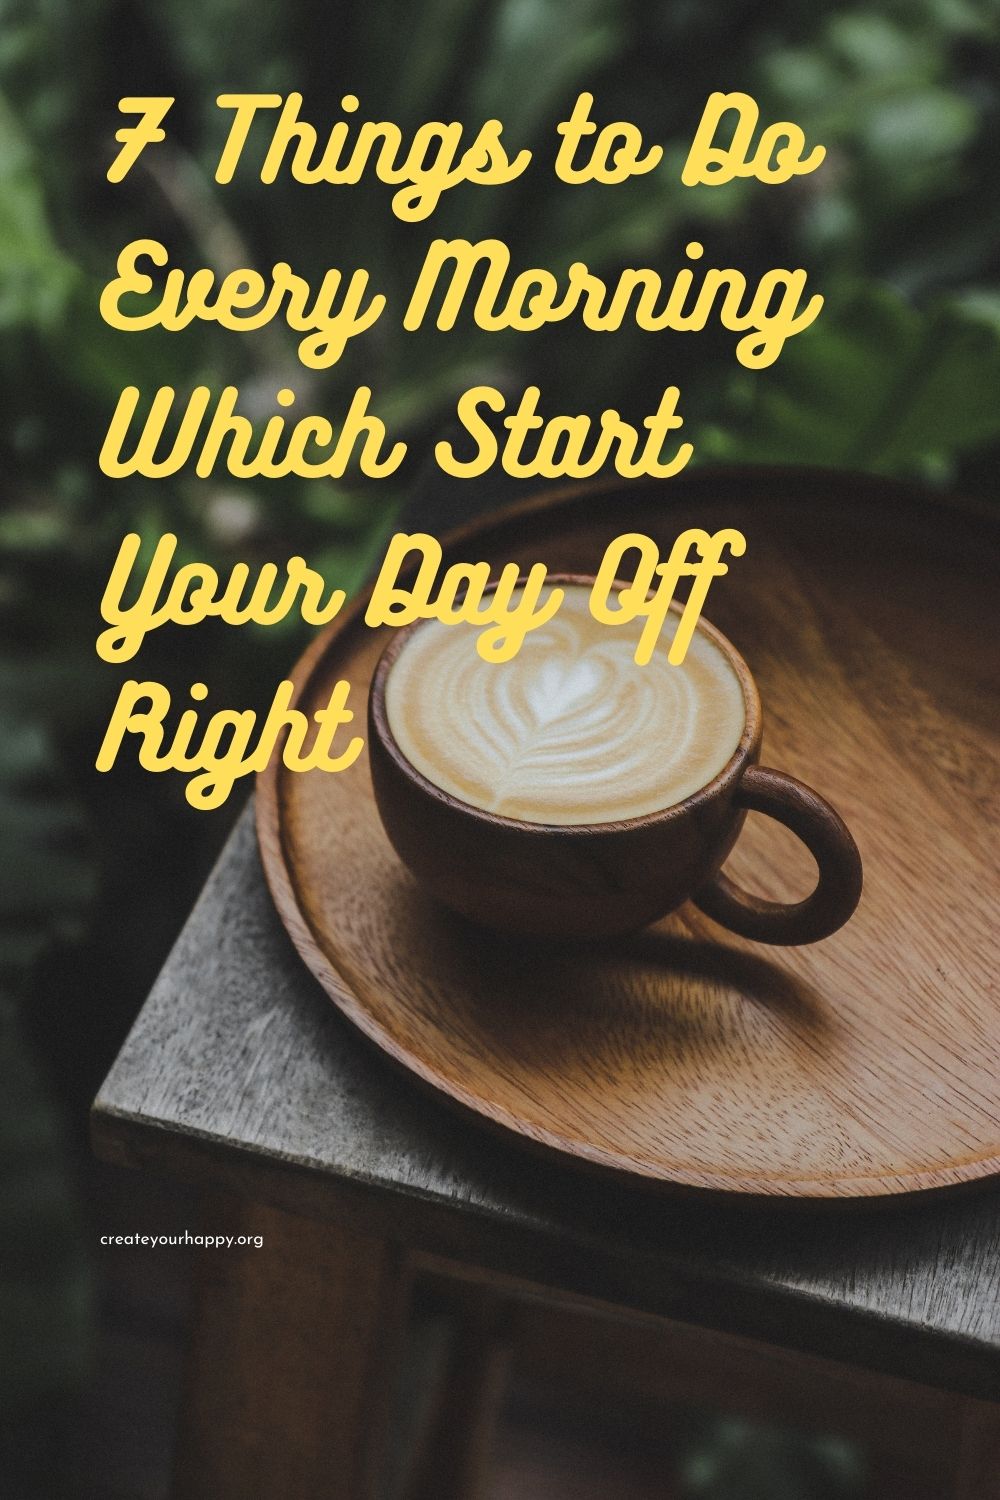 7 Things to Do Every Morning Which Start Your Day Off Right